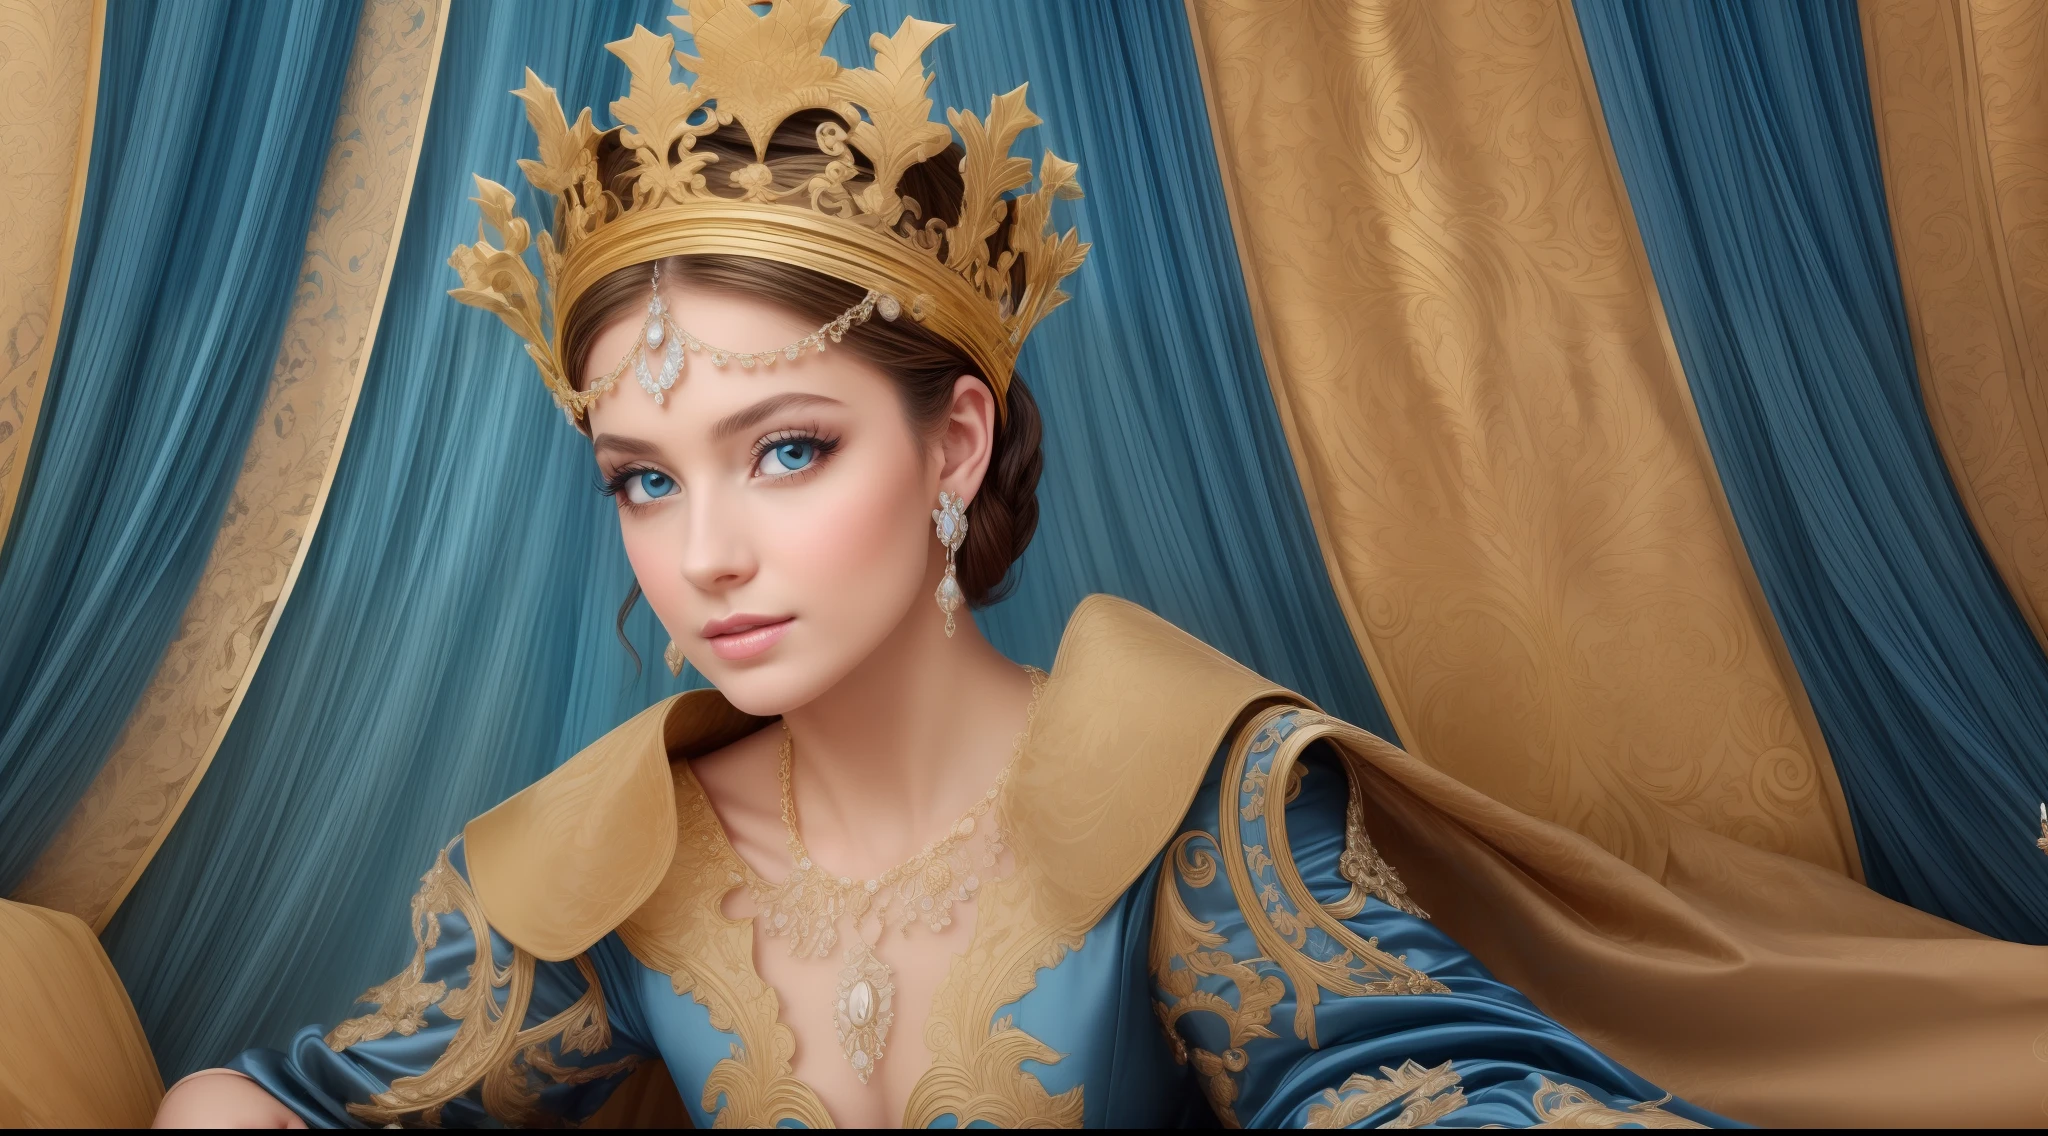 Imagine a French princess with curly blonde hair, sparkling blue eyes and an elegant Rococo-style dress in shades of blue and gold. The crown on your head should be ornate, inlaid with precious stones.(adicionar_detail:1)